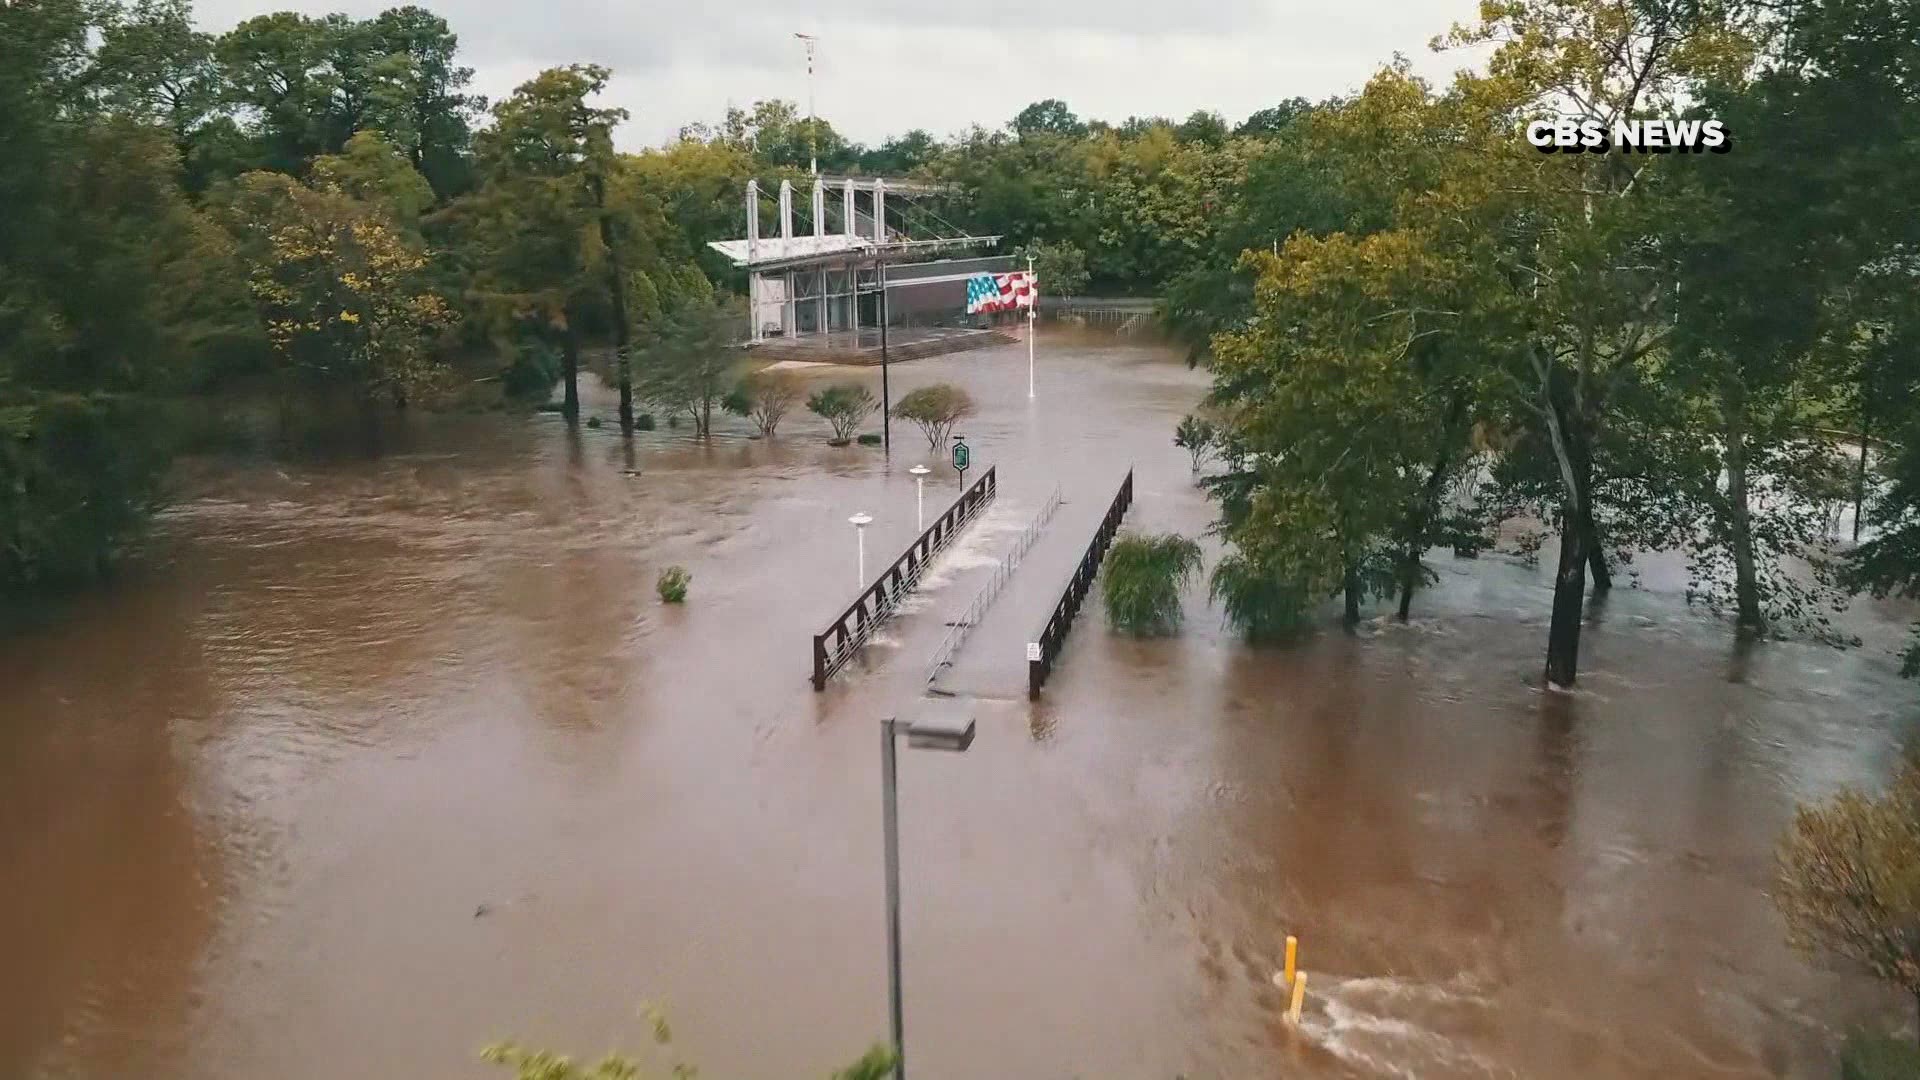 Drone Flies Over Flooding In Fayetteville, NC After Florence